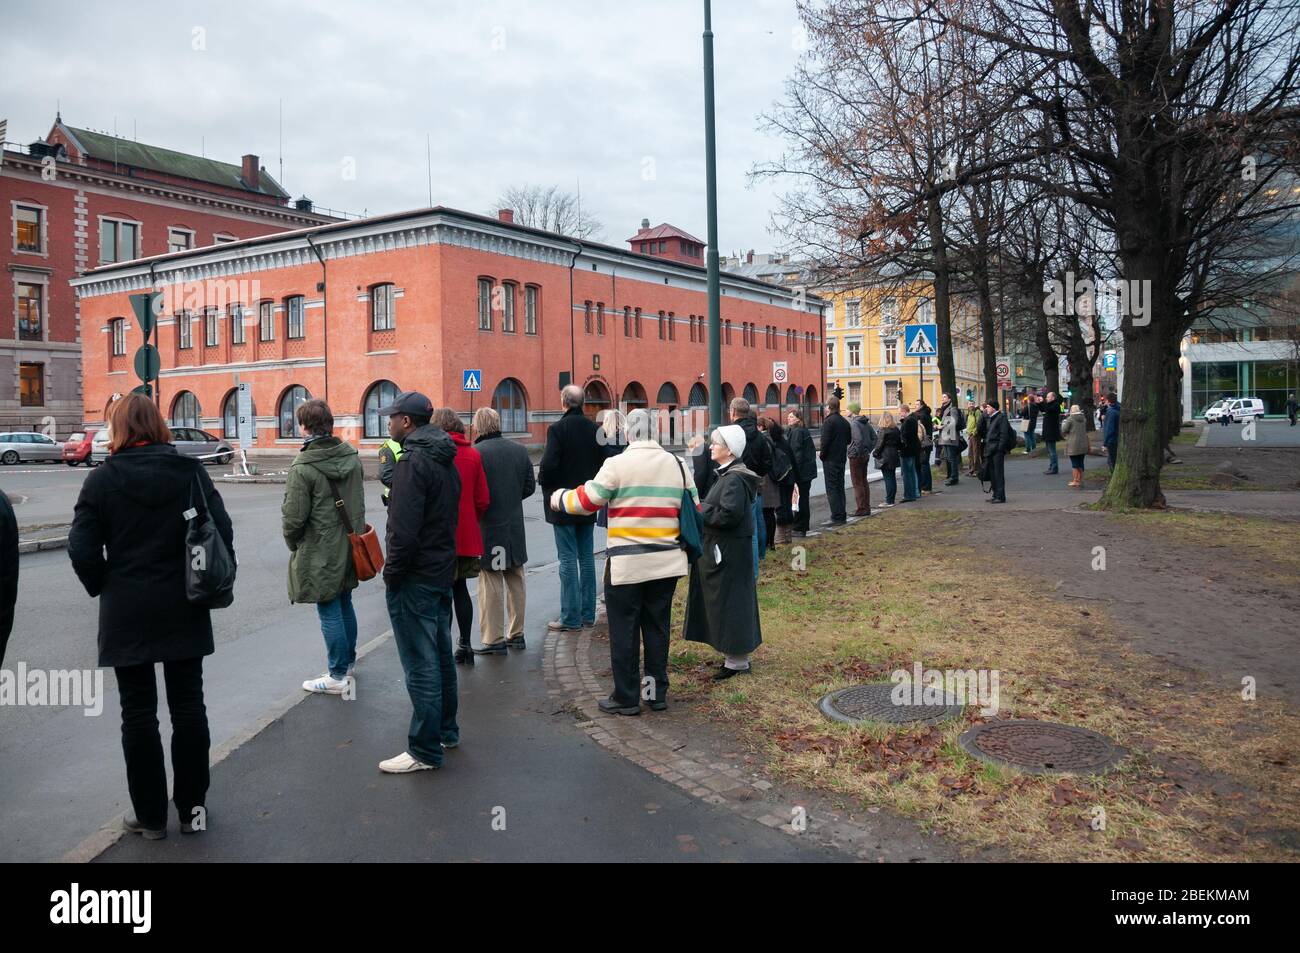 Oslo, Norway December 11, 2009: The crowd on the streets of Oslo waiting to greet president Obama who received the nobel peace prize. Stock Photo